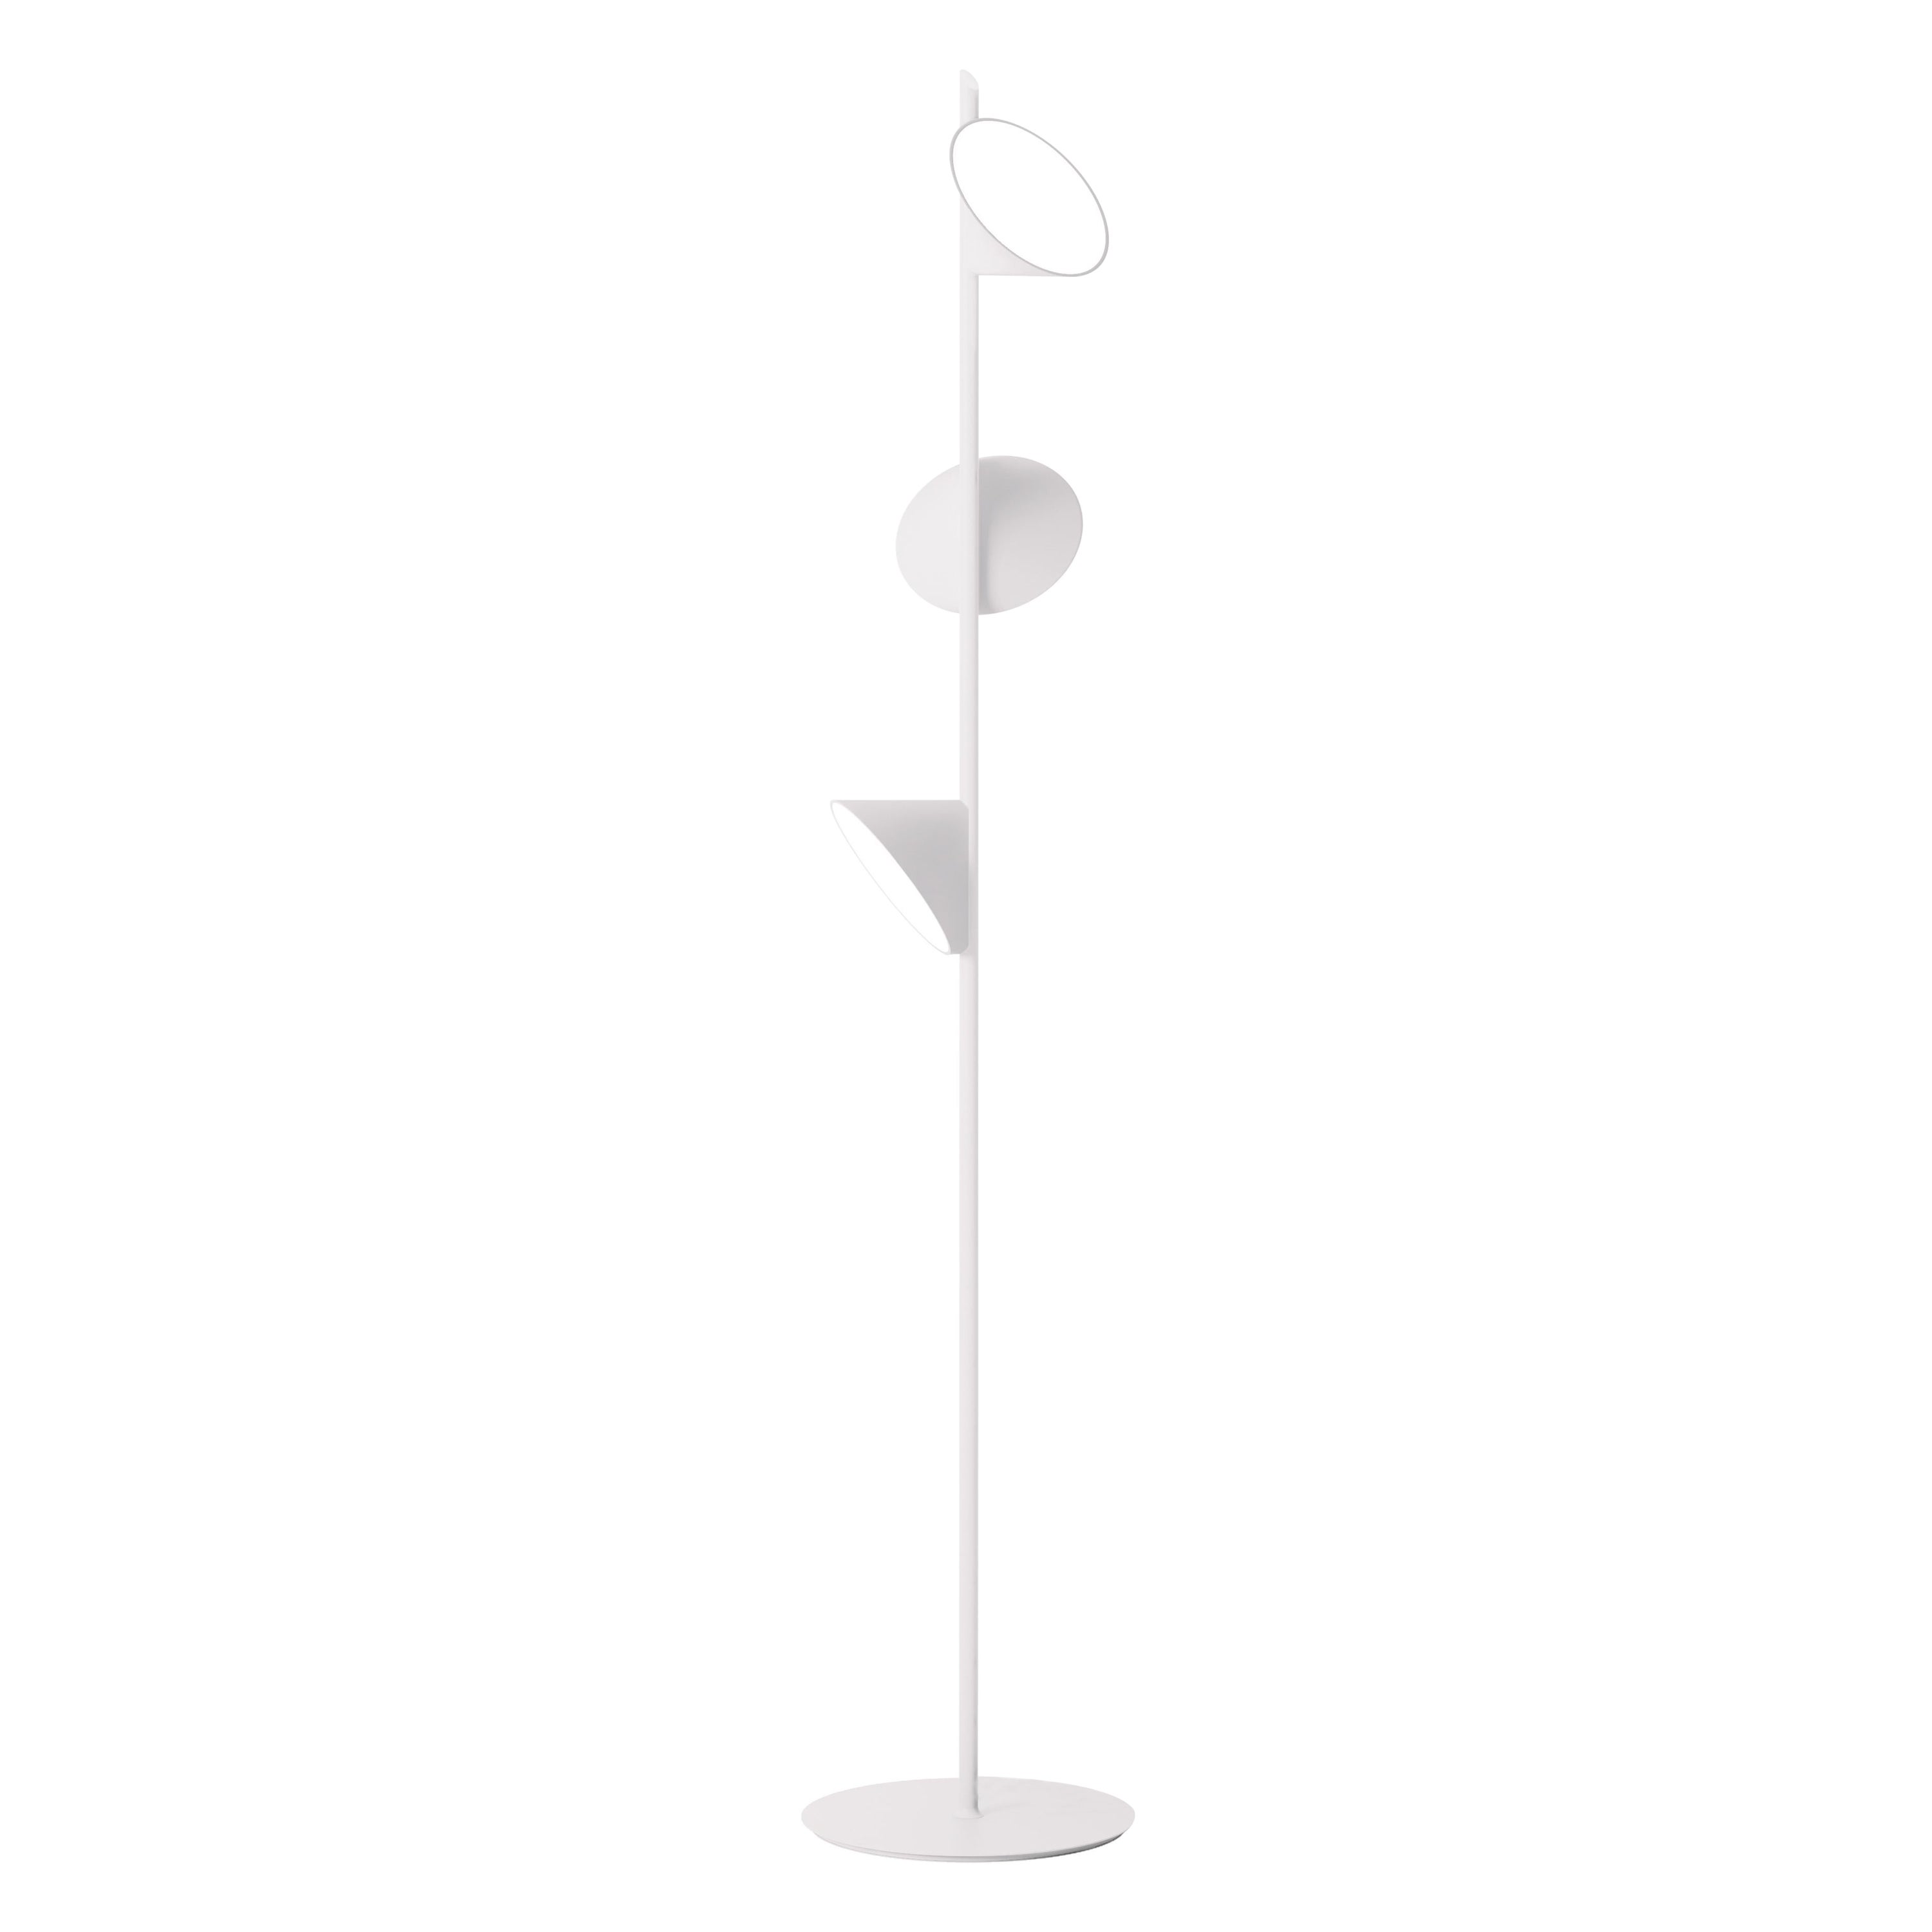 Axolight Orchid Floor Lamp with Aluminum Body in White by Rainer Mutsch